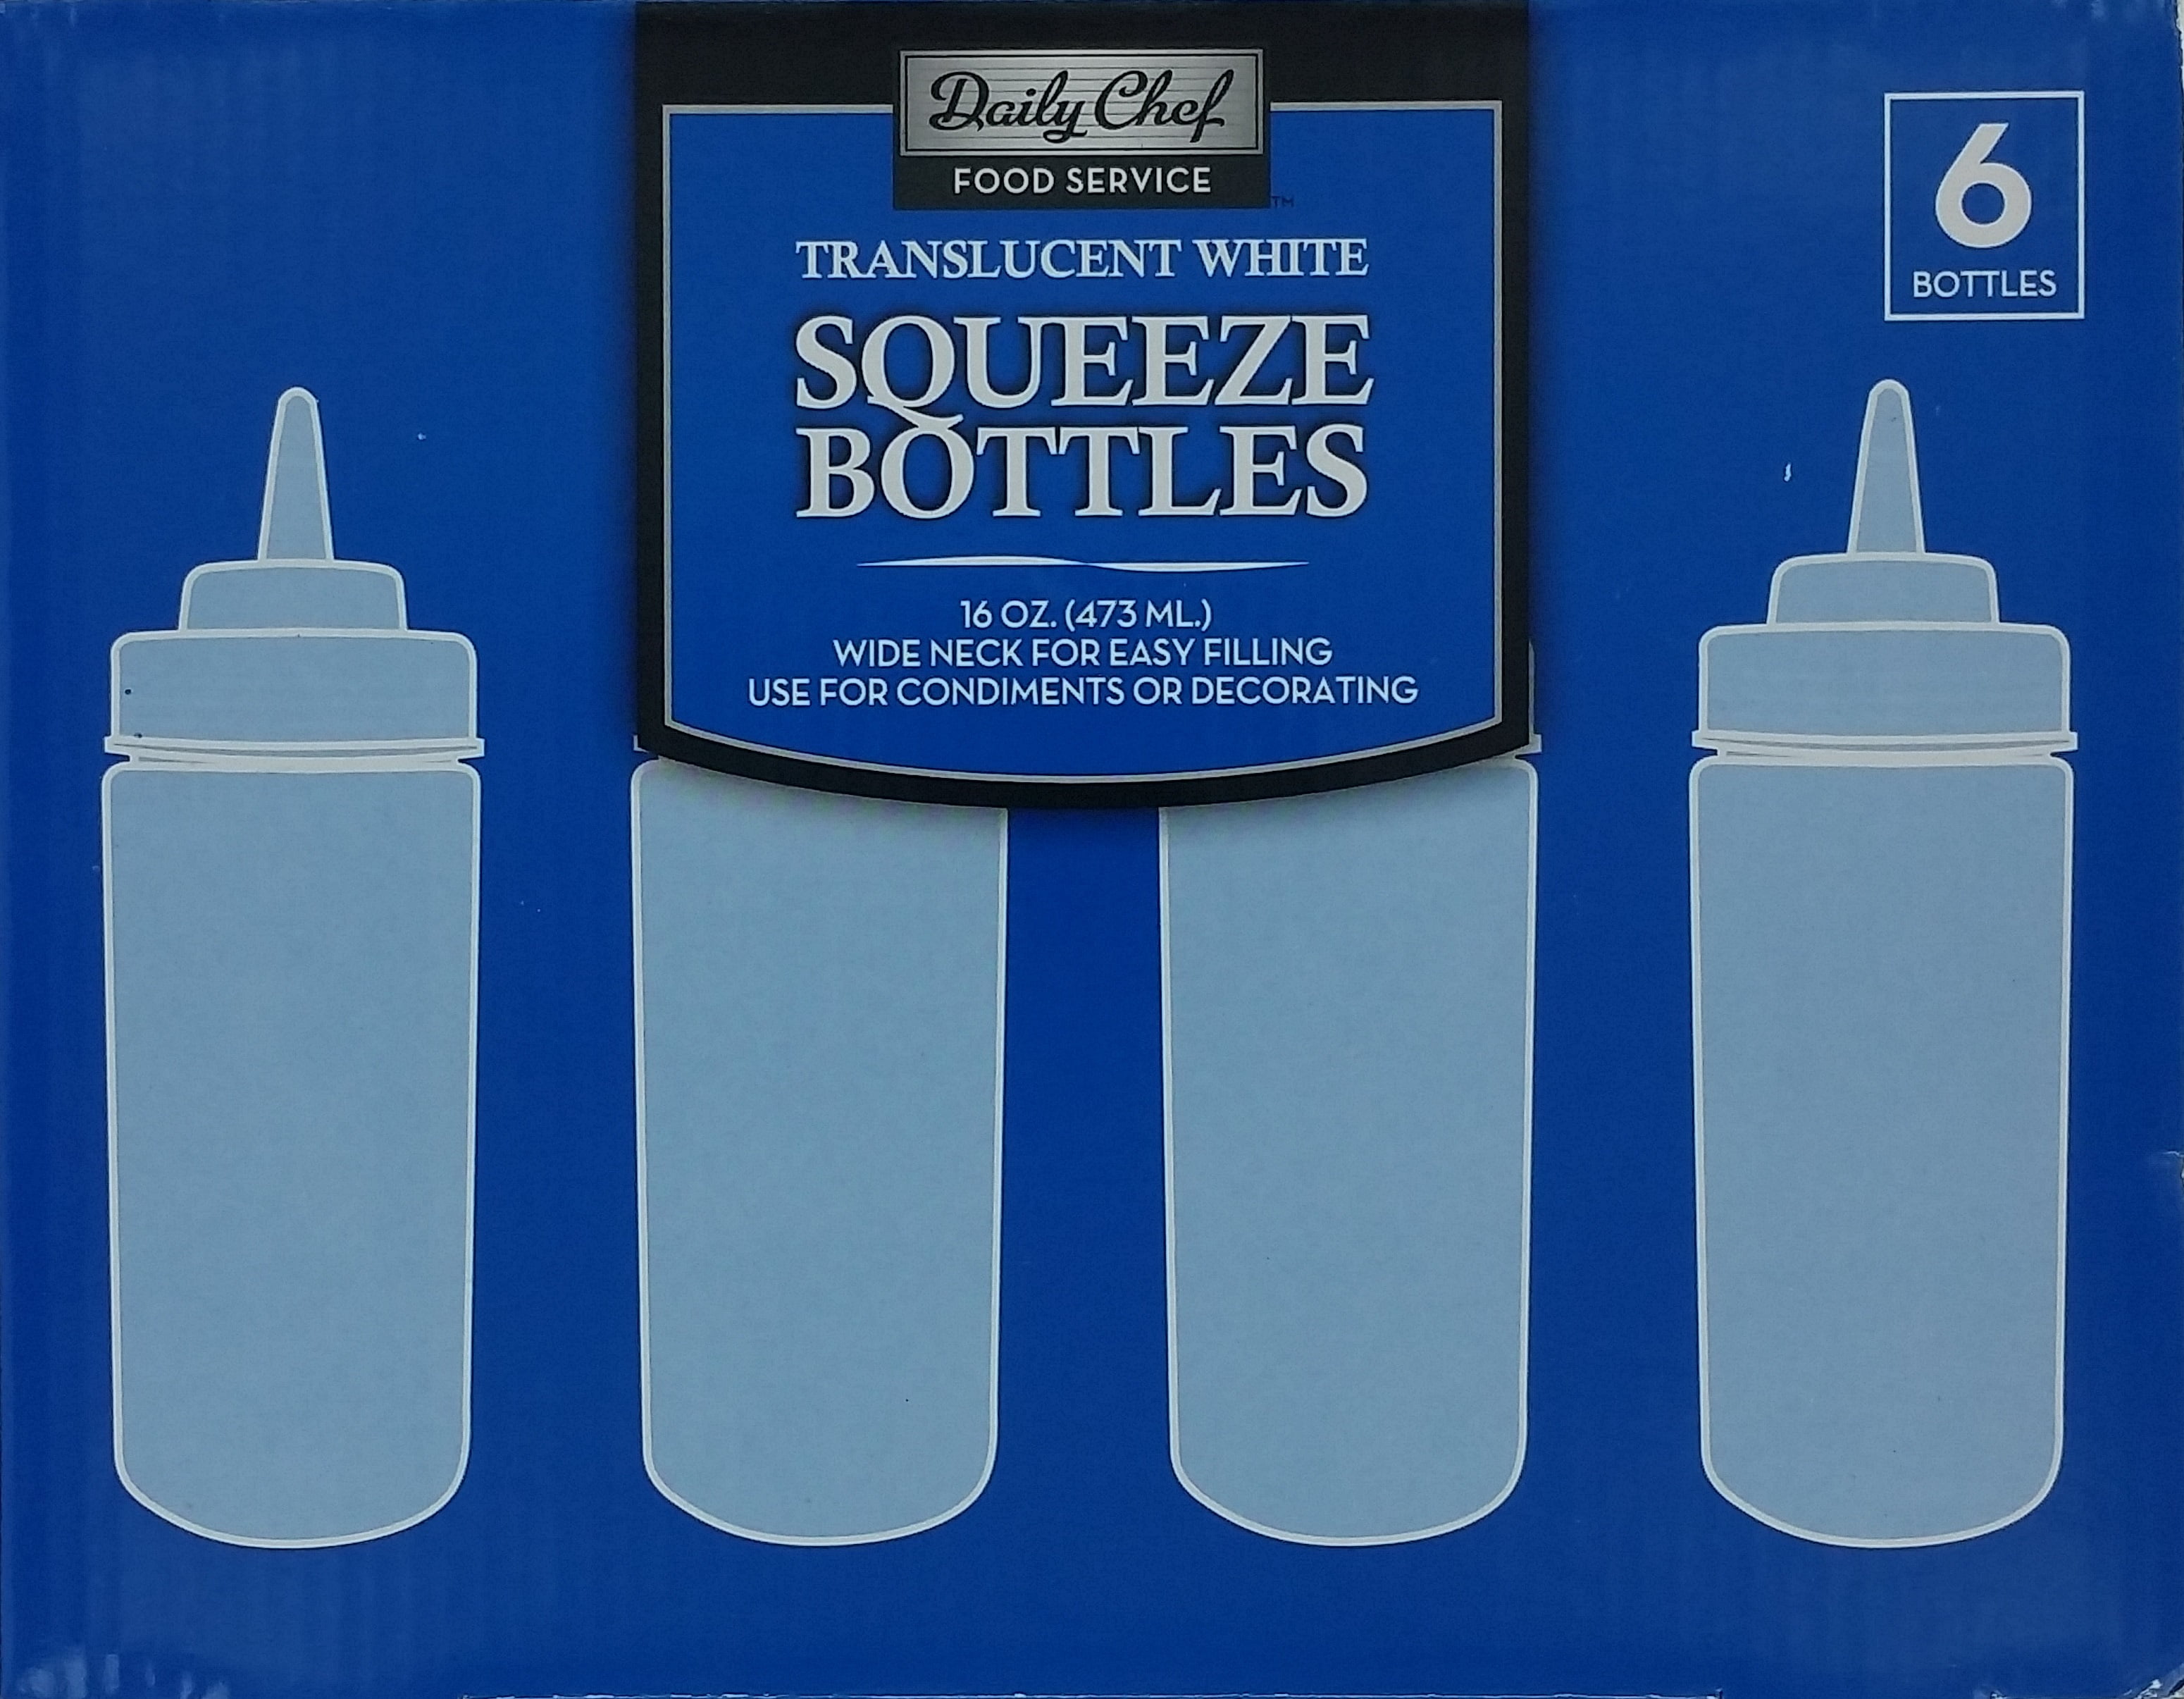 Chefs love squeeze bottles. Which is our favorite? #squeezebottles